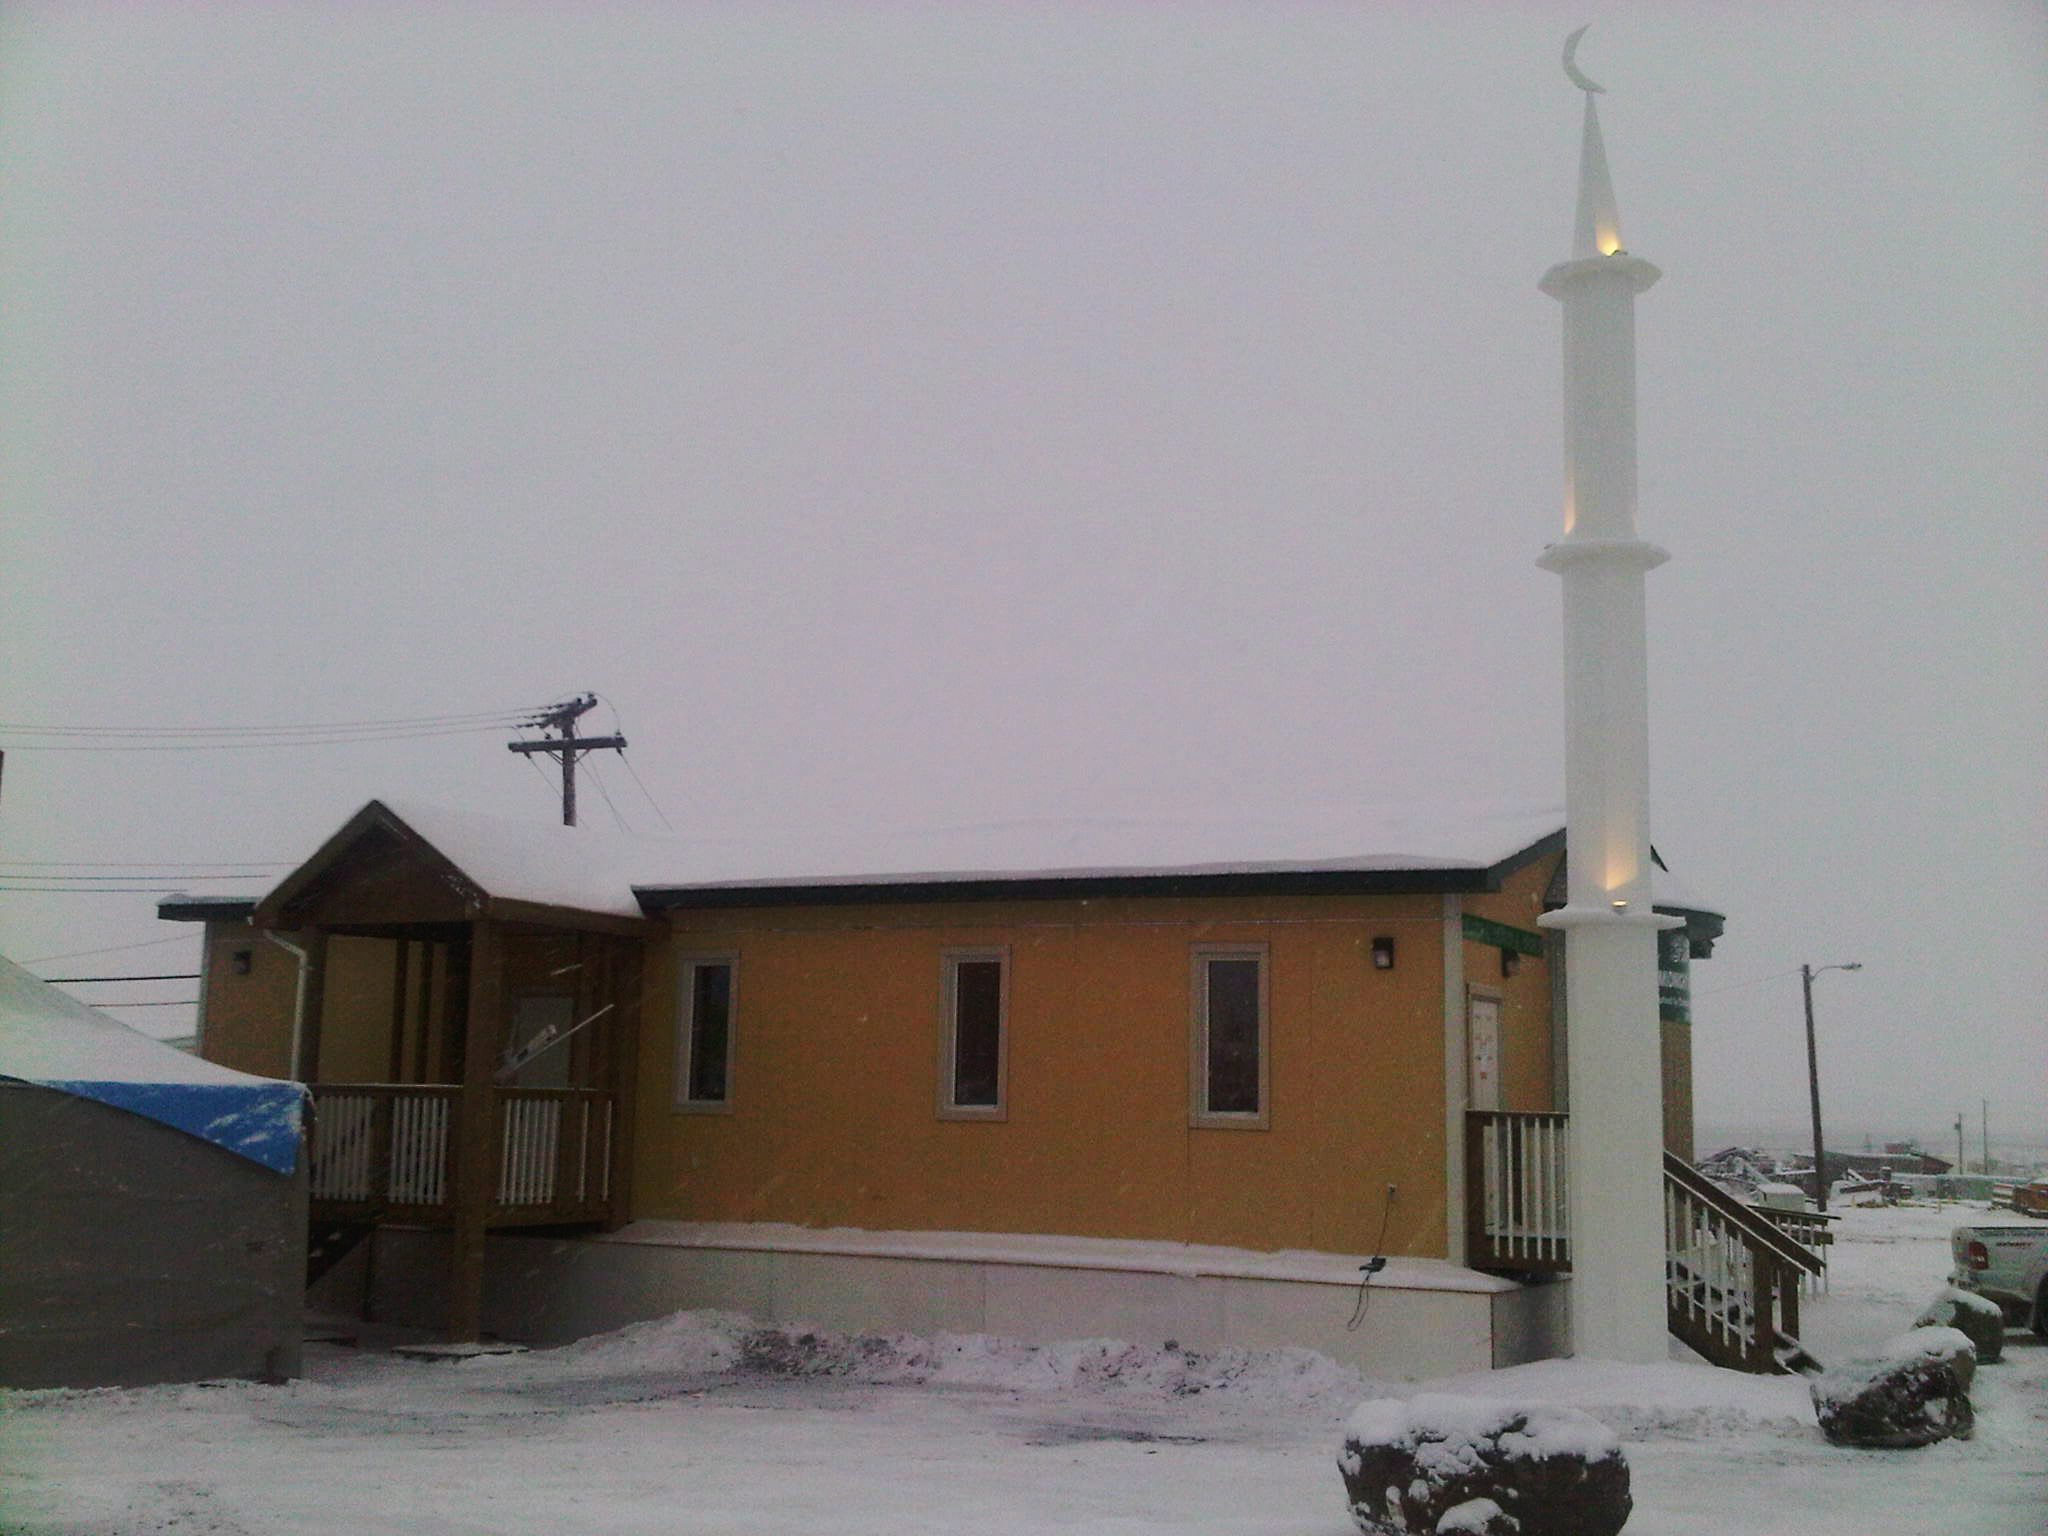 The most northerly mosque in North America, shown in Inuvik, N.W.T. on Nov.10, 2010. Inuvik, a town of 3,300 people north of the Arctic Circle, has some 80 Muslim residents. (Hussain Guisti / THE CANADIAN PRESS / HO)